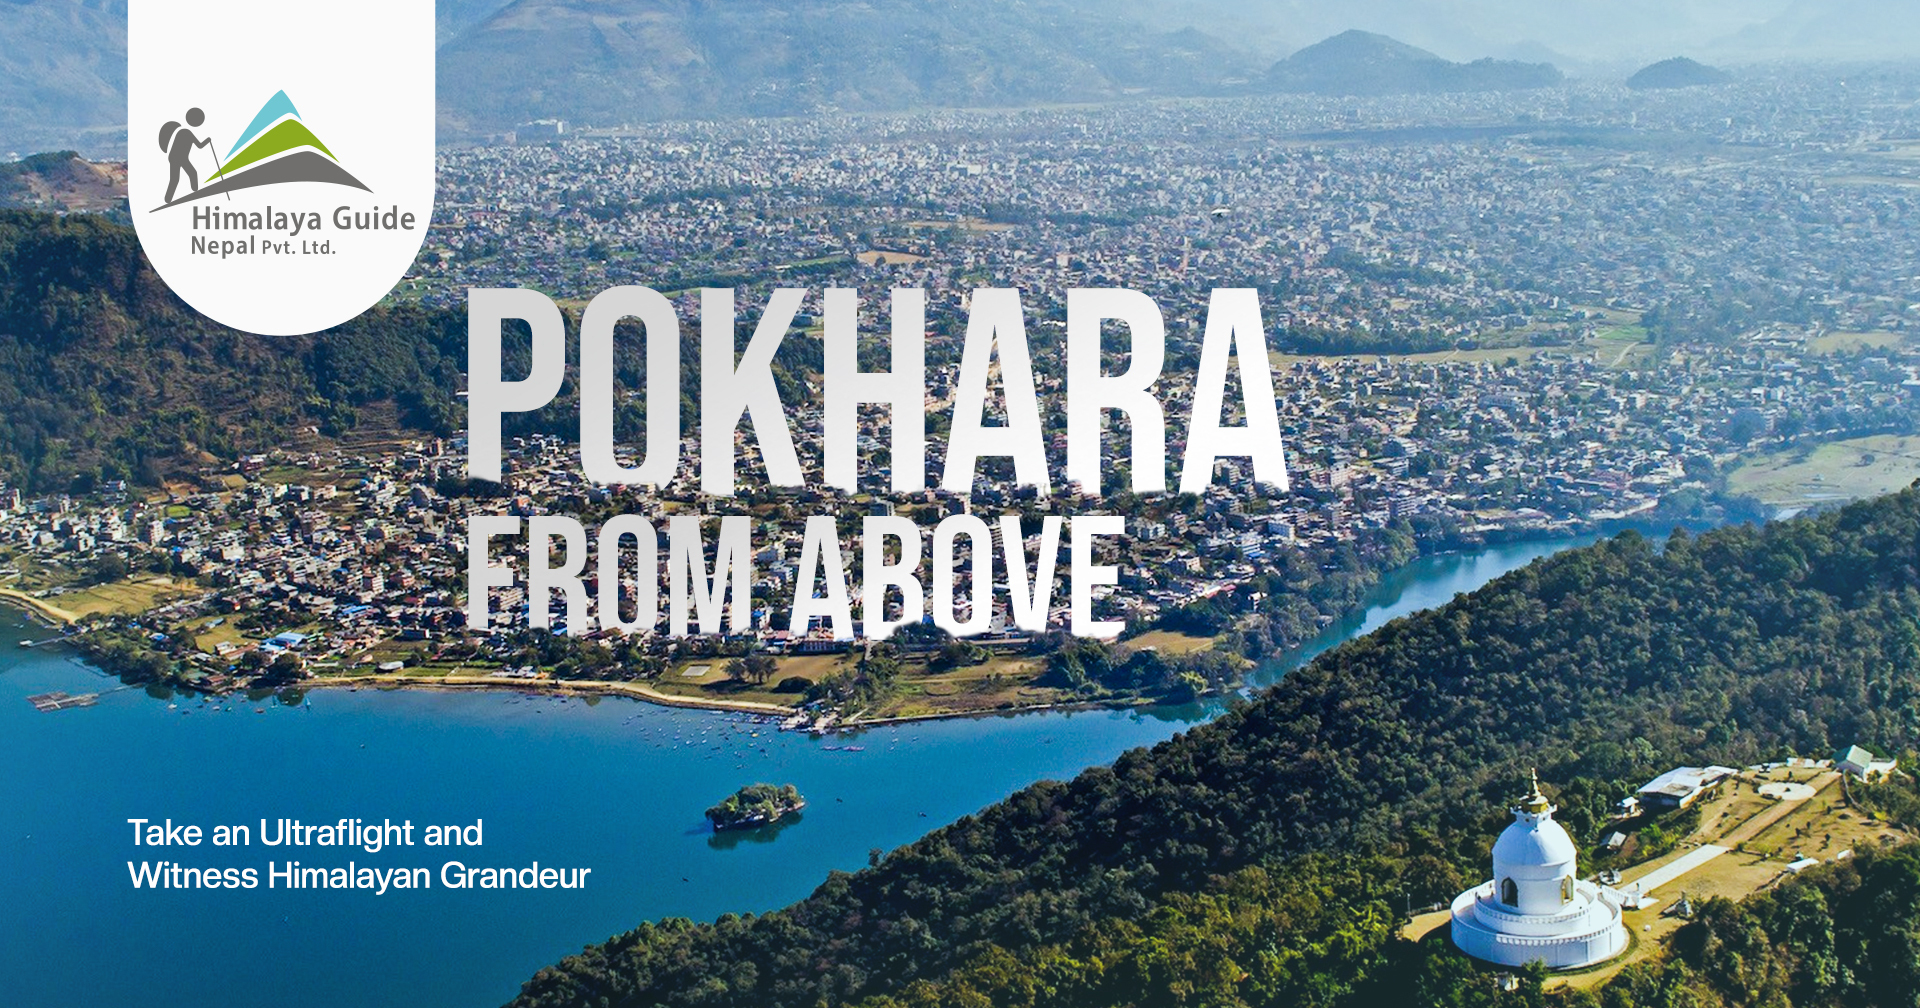 Pokhara from Above: Take an Ultralight flight and Witness Himalayan Grandeur